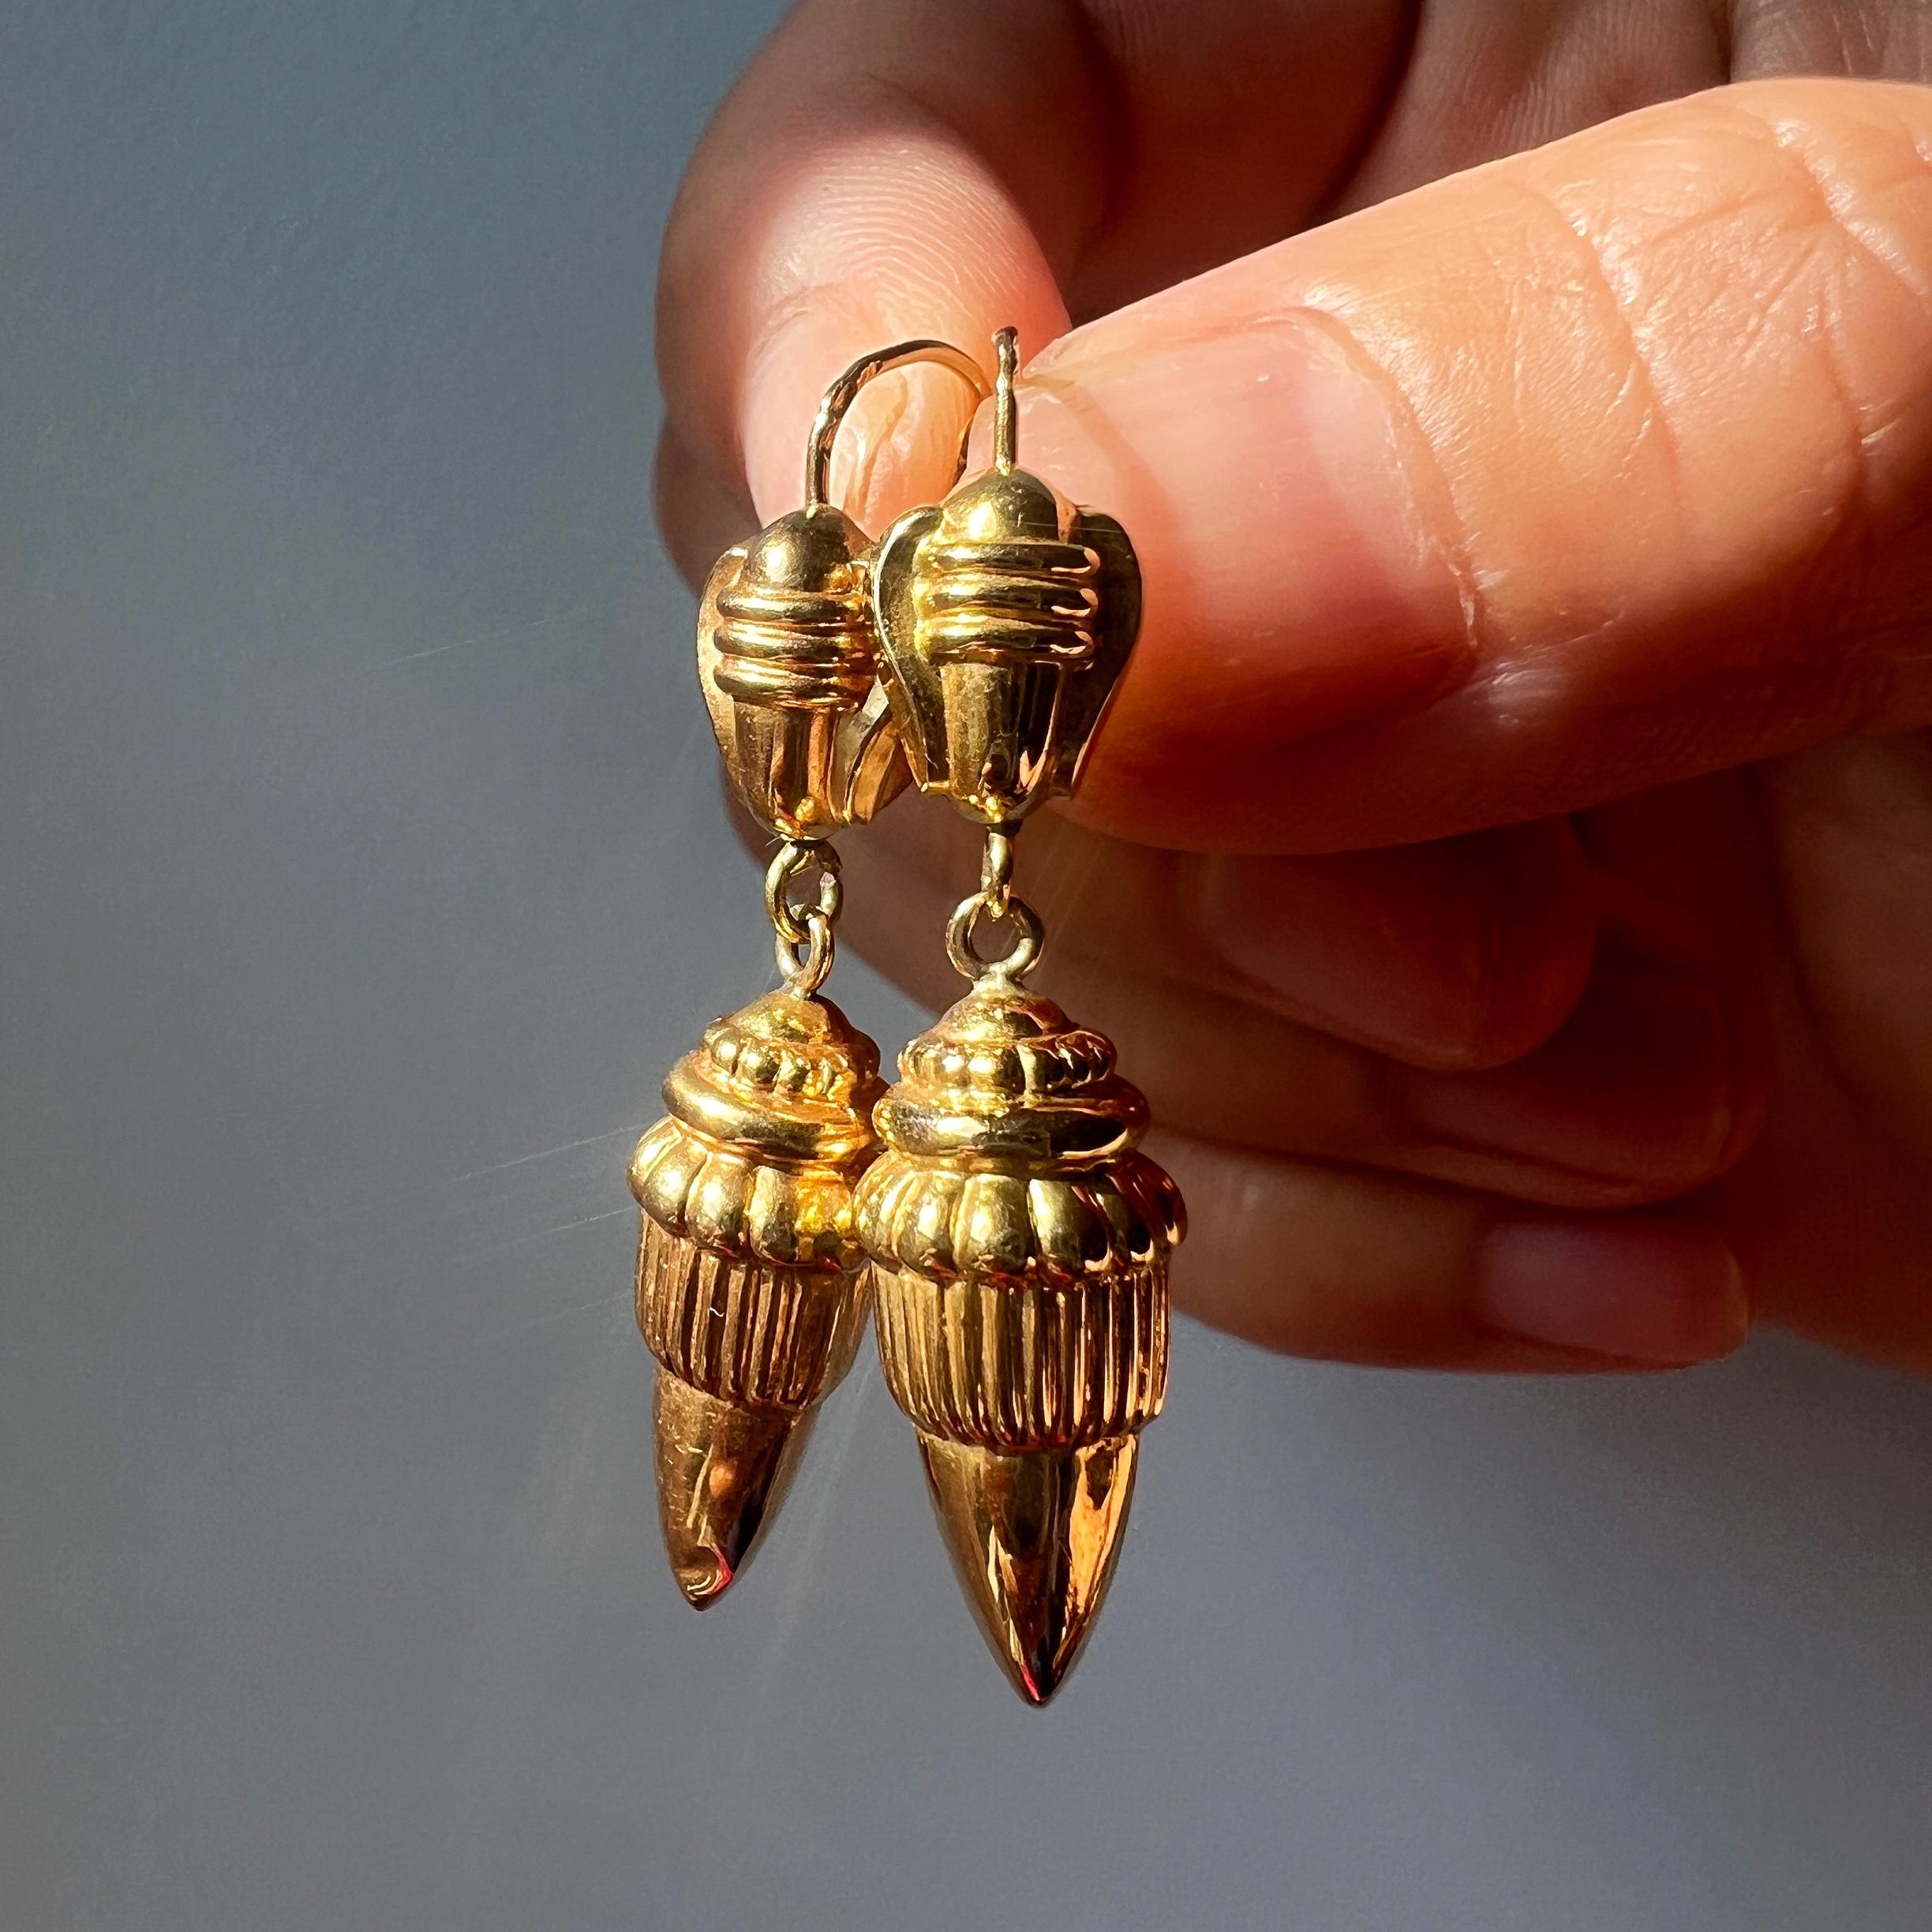 Gold and eye-catching, these archaeological revival style earrings act as timeless staples for collectors. The symbolism behind also makes them very special since acorn, as a seed, is the symbol of growth and unlimited potential – they grow into the